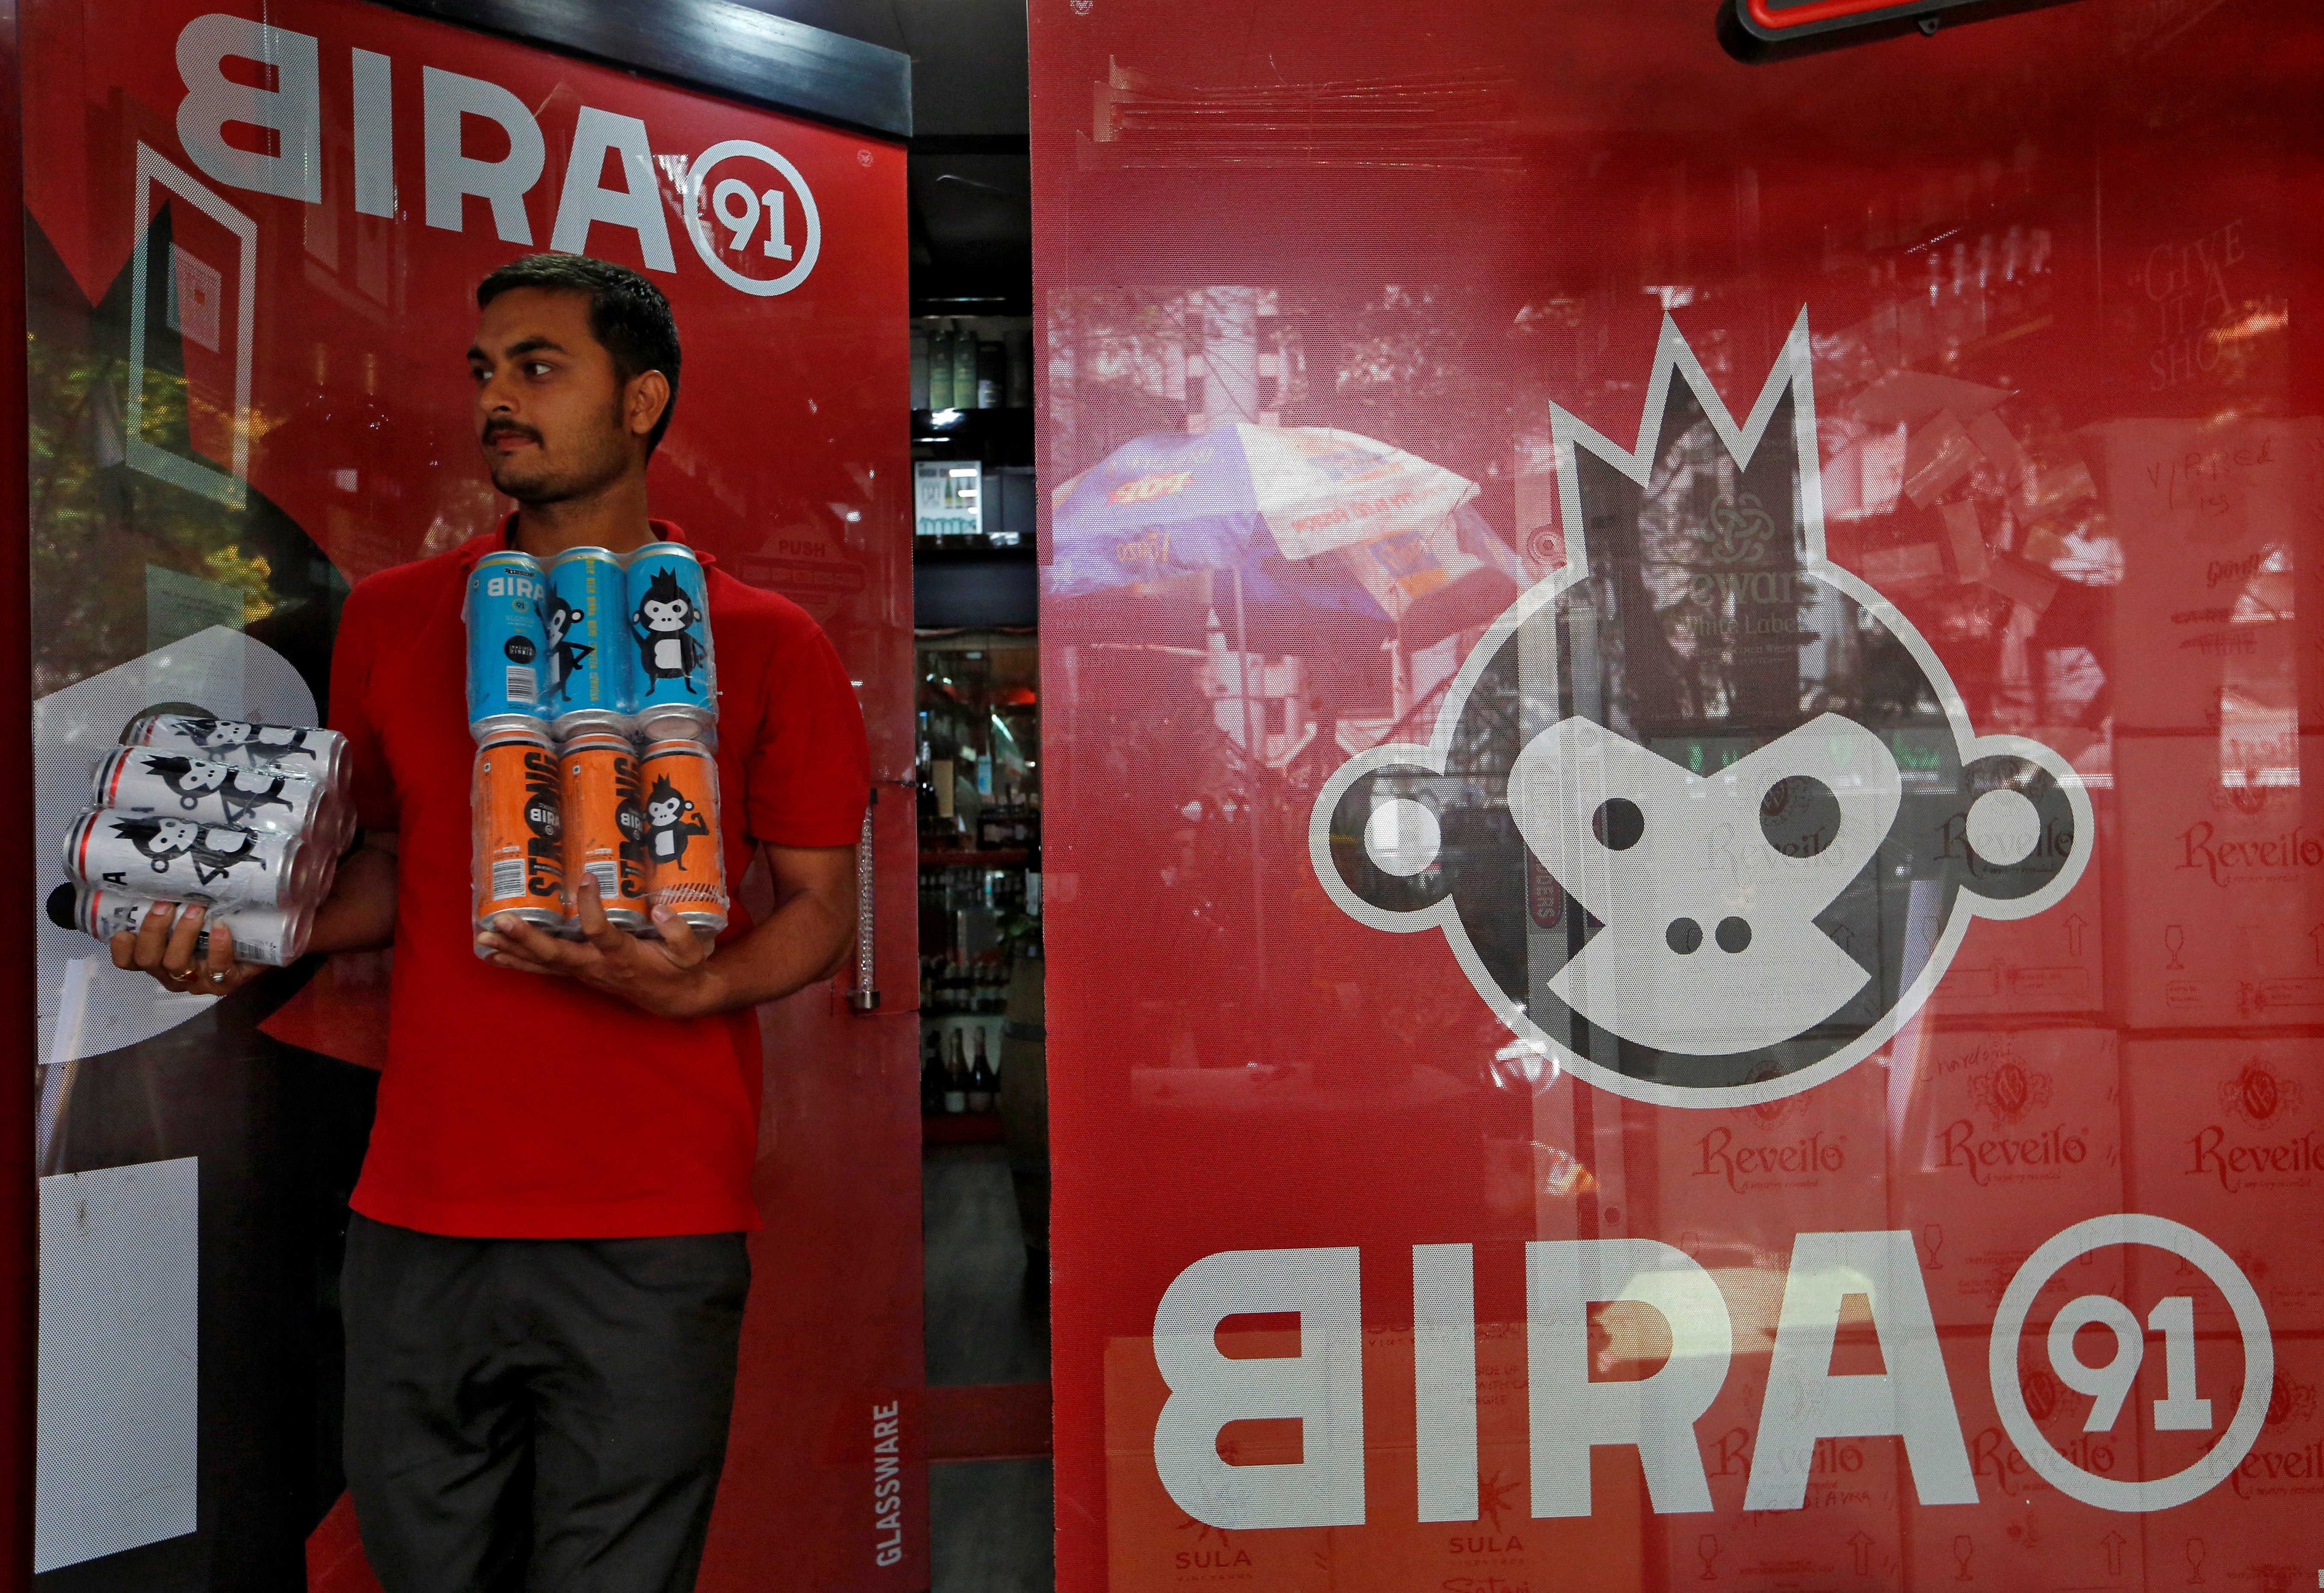 Compare prices for Bira Craft across all European  stores